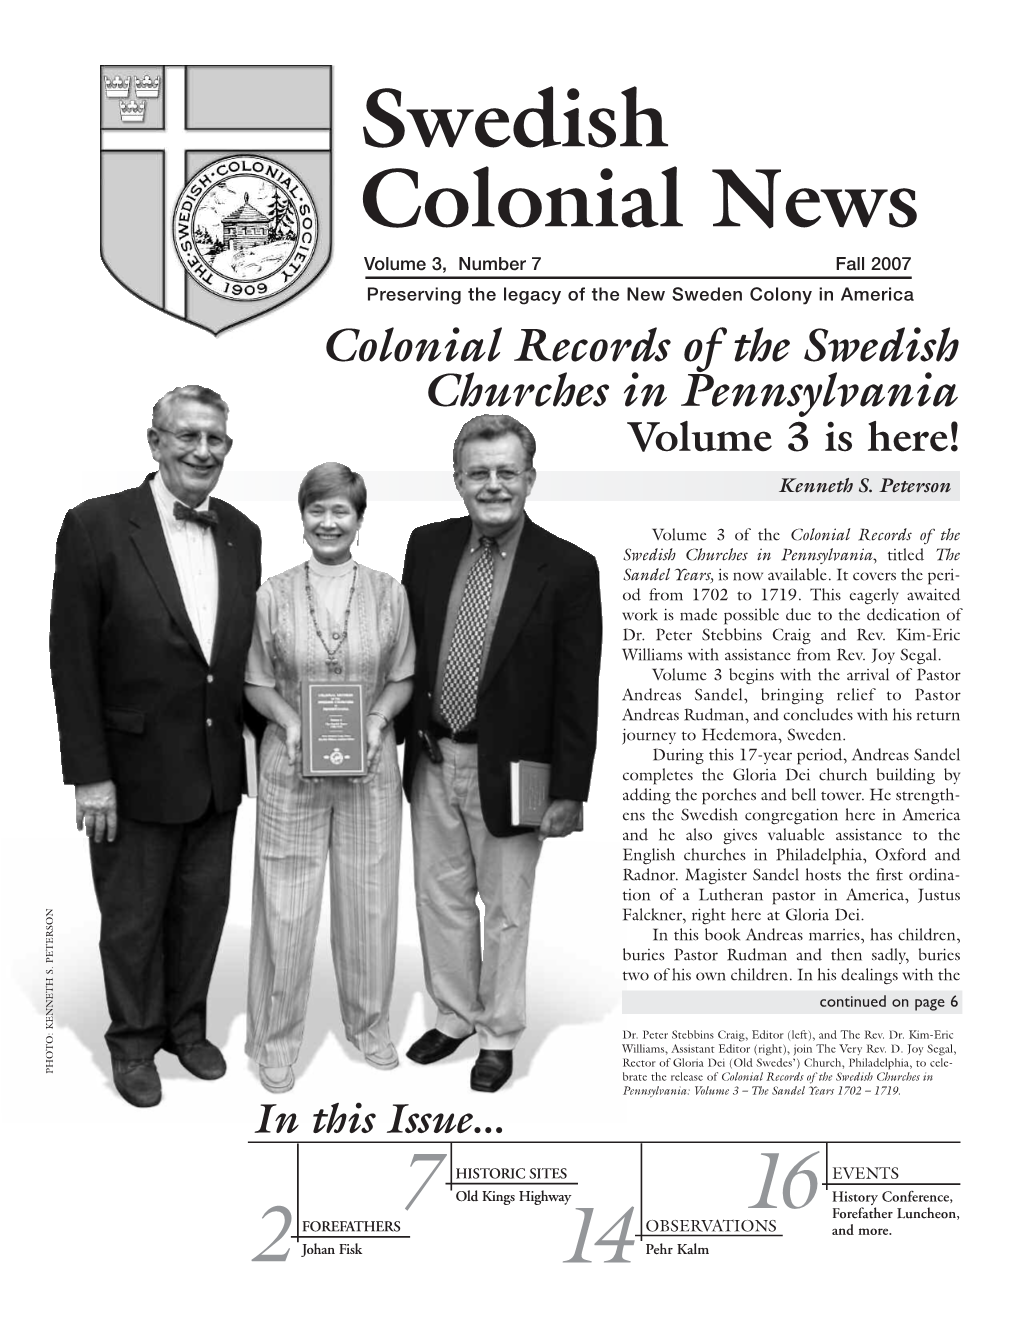 SCS News Fall 2007, Volume 3, Number 7